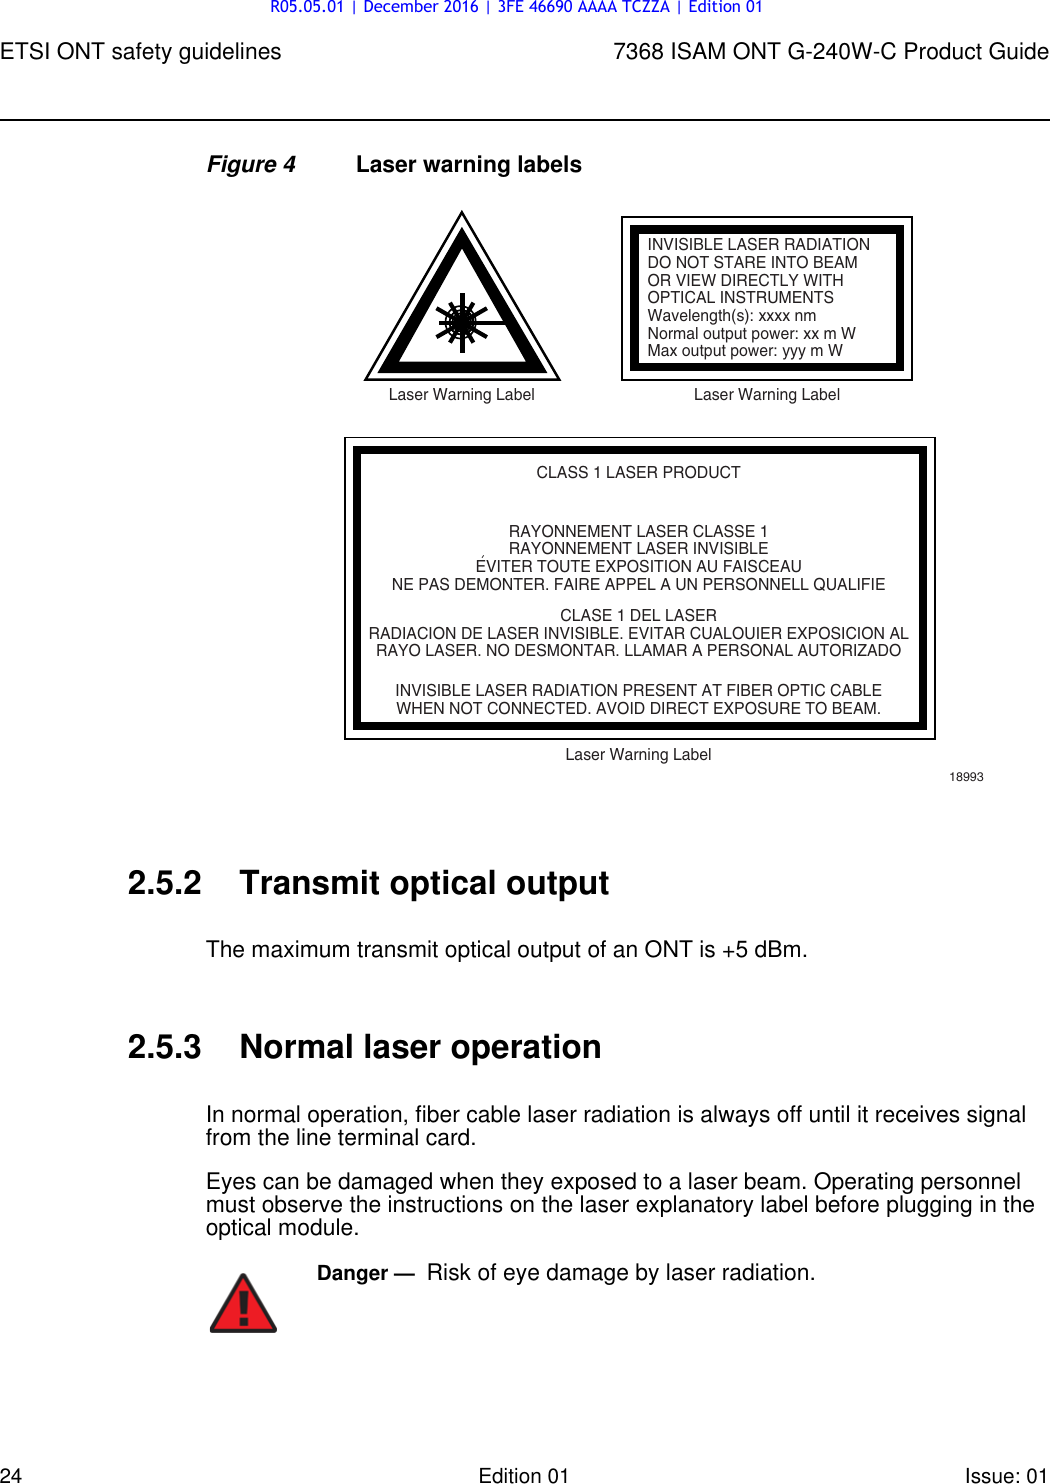 Page 24 of Nokia Bell G240W-C GPON ONU User Manual 7368 ISAM ONT G 240W B Product Guide